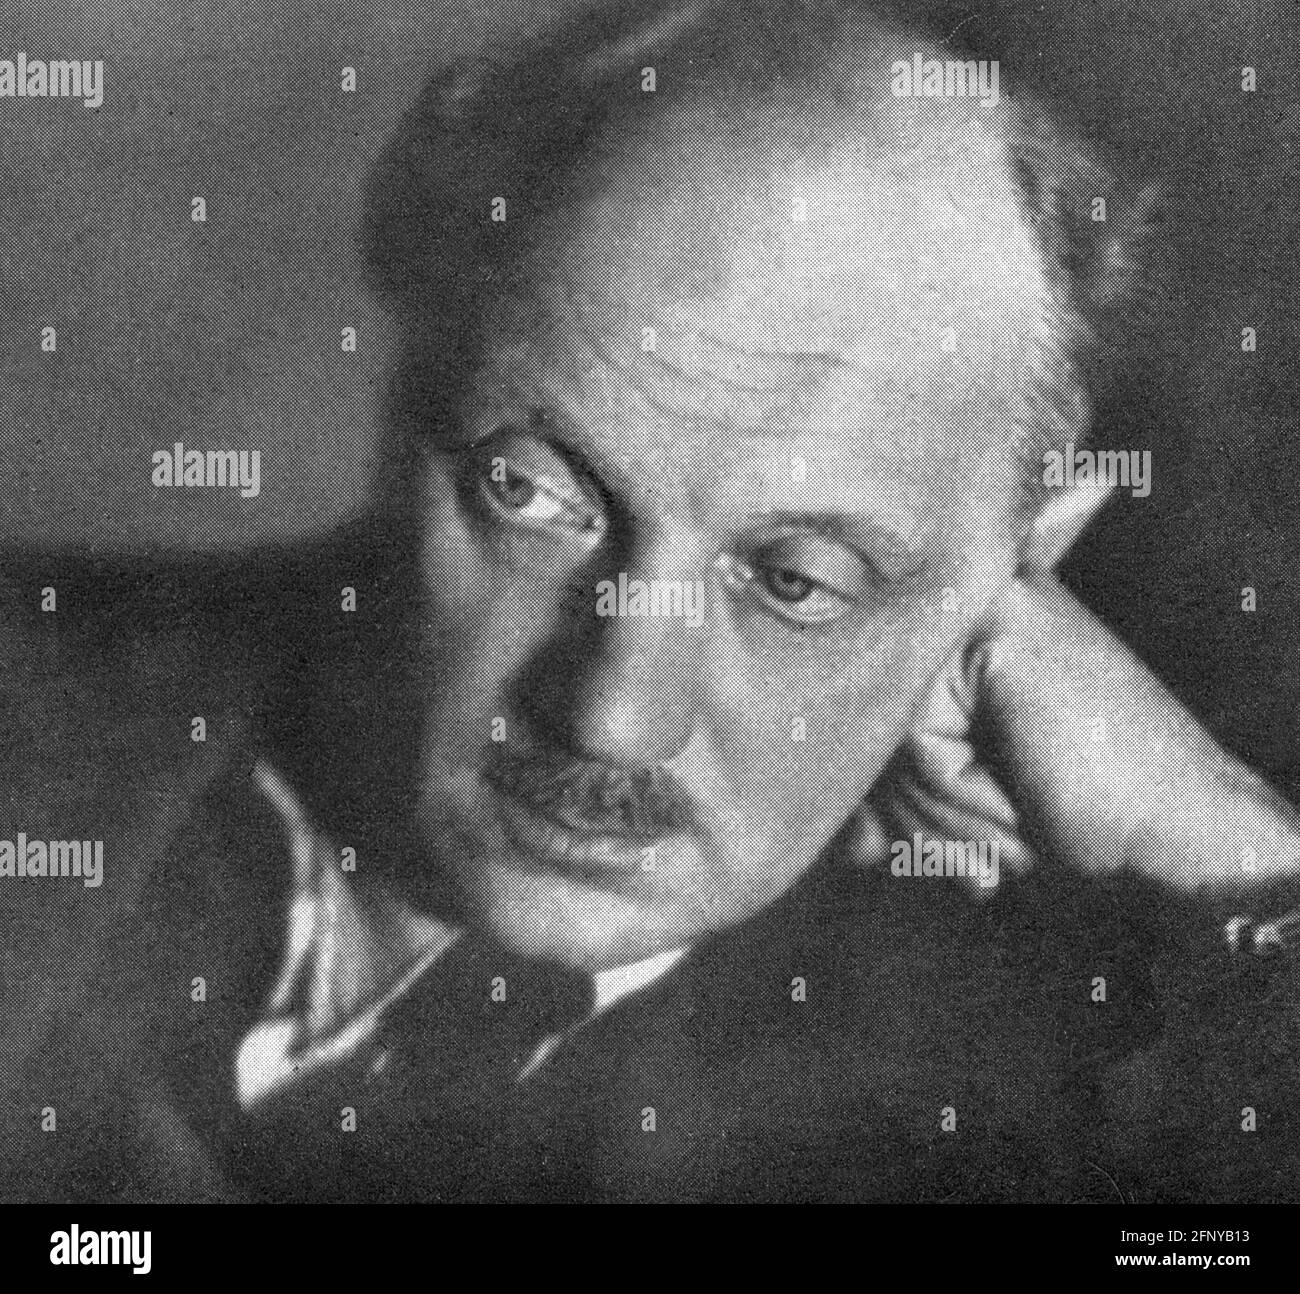 Kaiser, Georg, 25.11.1878 - 6.6.1945, German playwright, portrait, 1940s, ADDITIONAL-RIGHTS-CLEARANCE-INFO-NOT-AVAILABLE Stock Photo